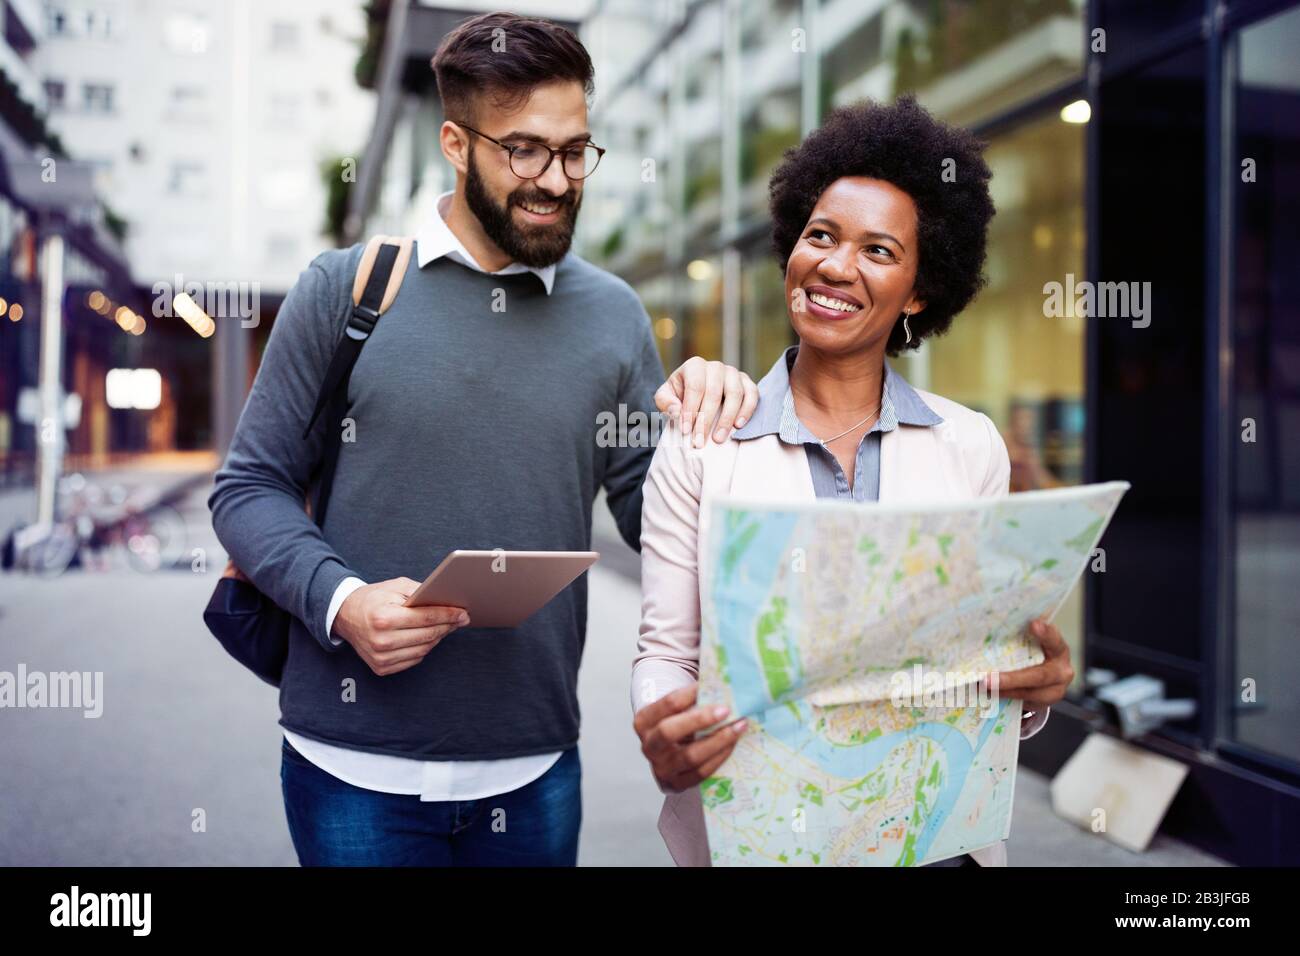 Lost happy couple in the city holding a map. Travel, tourism, people concept Stock Photo